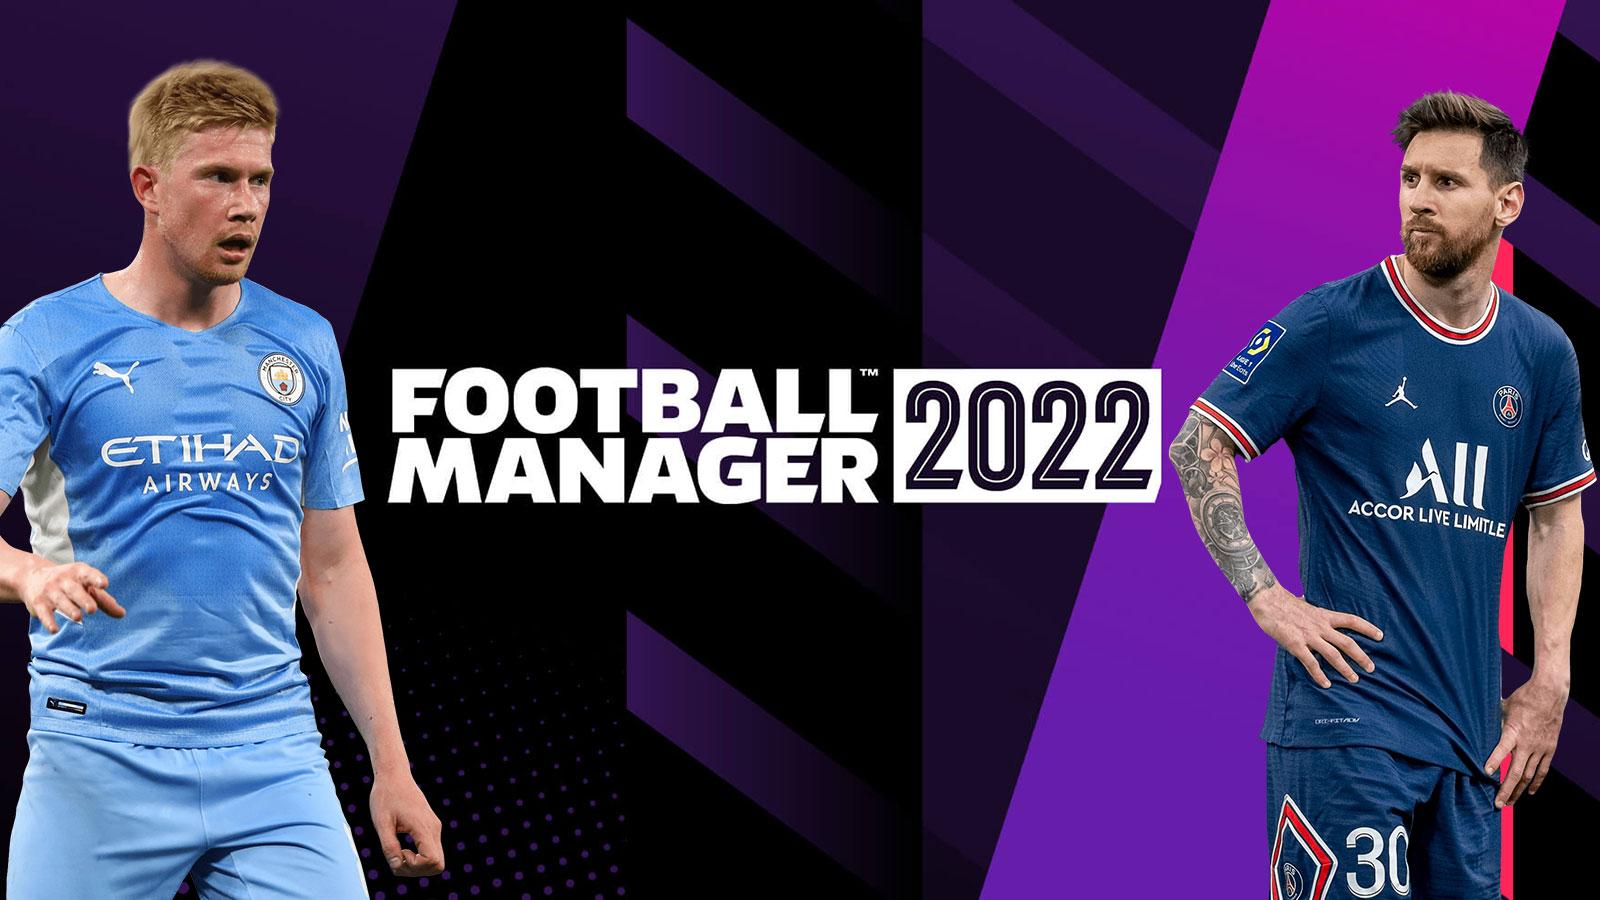 Messi De Bruyne Football Manager 2022